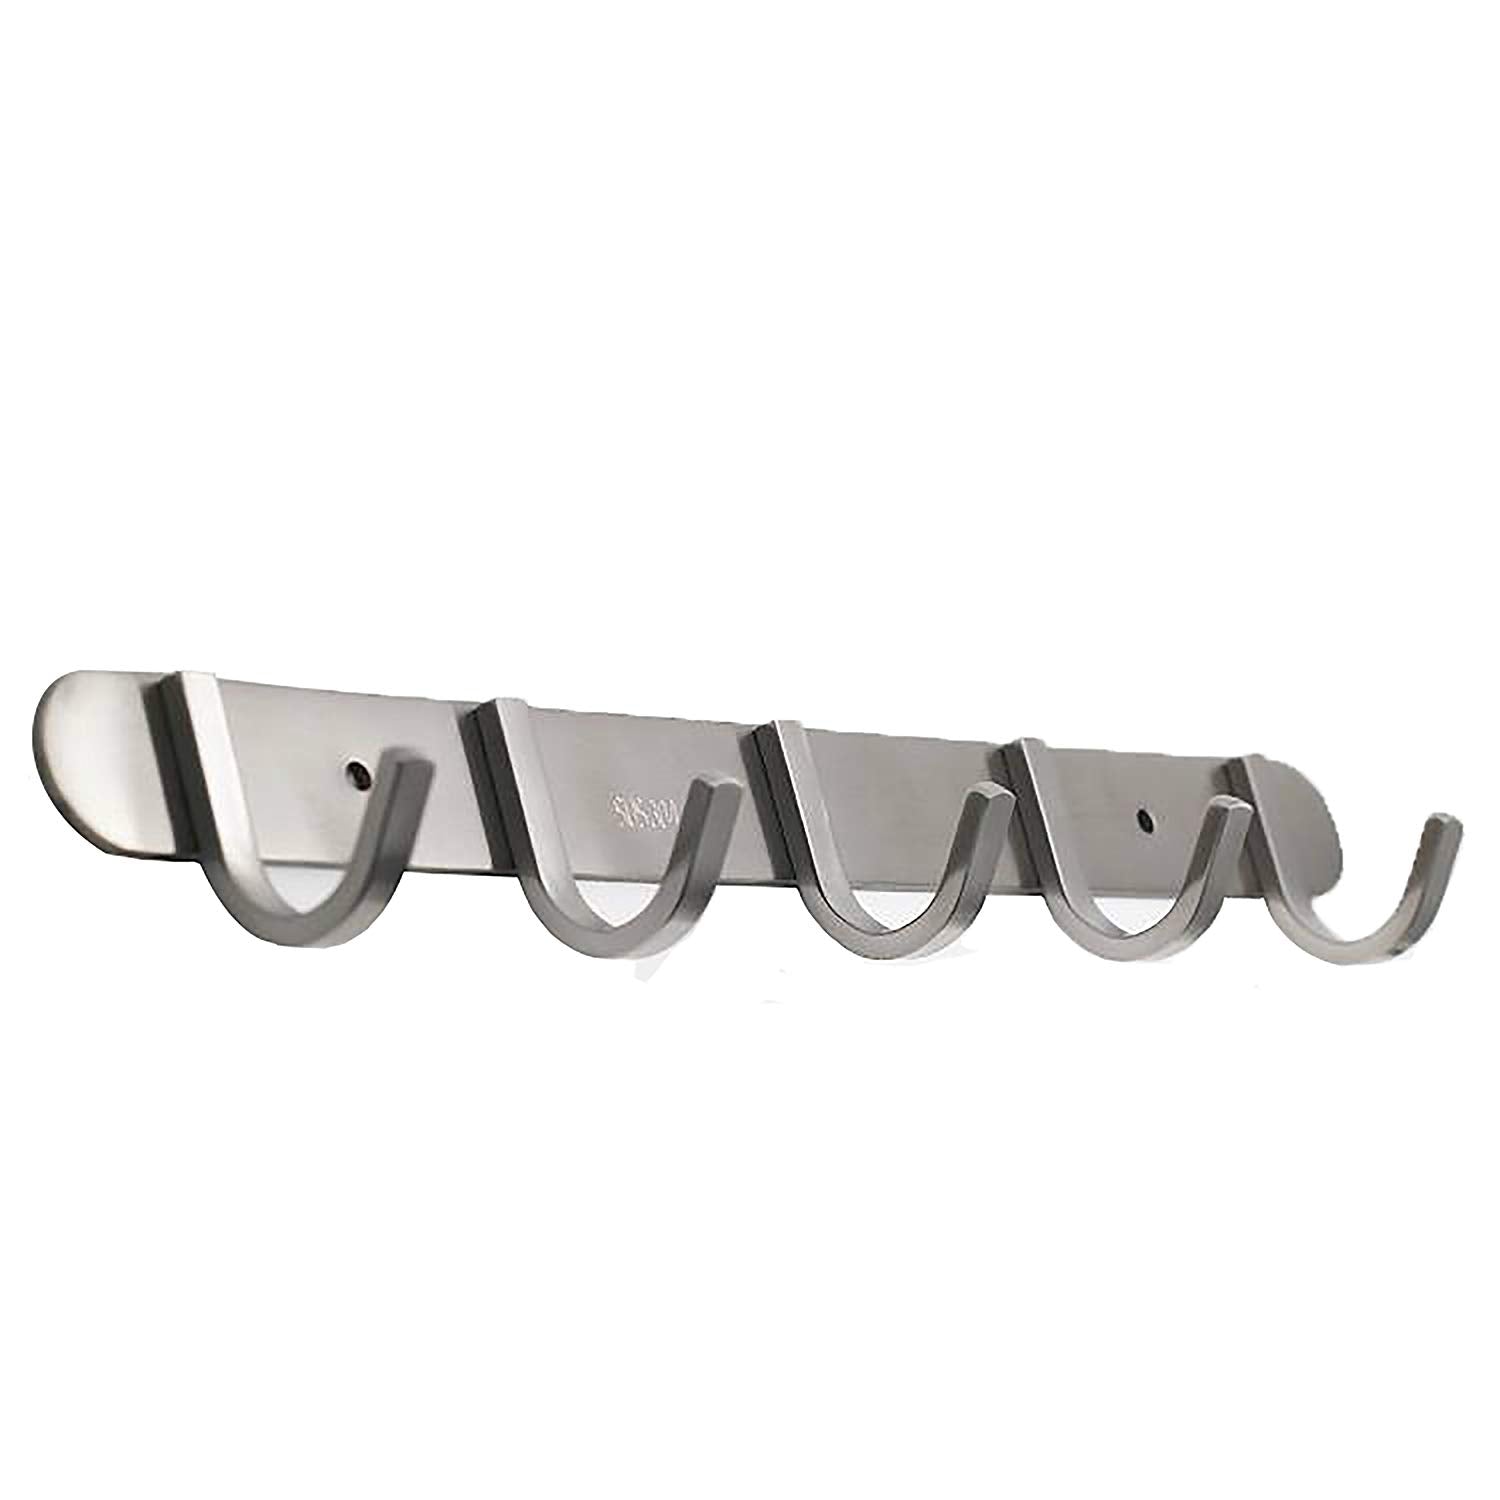 QT Premium Modern Wall Mounted Coat Rack with 5 Square Hooks